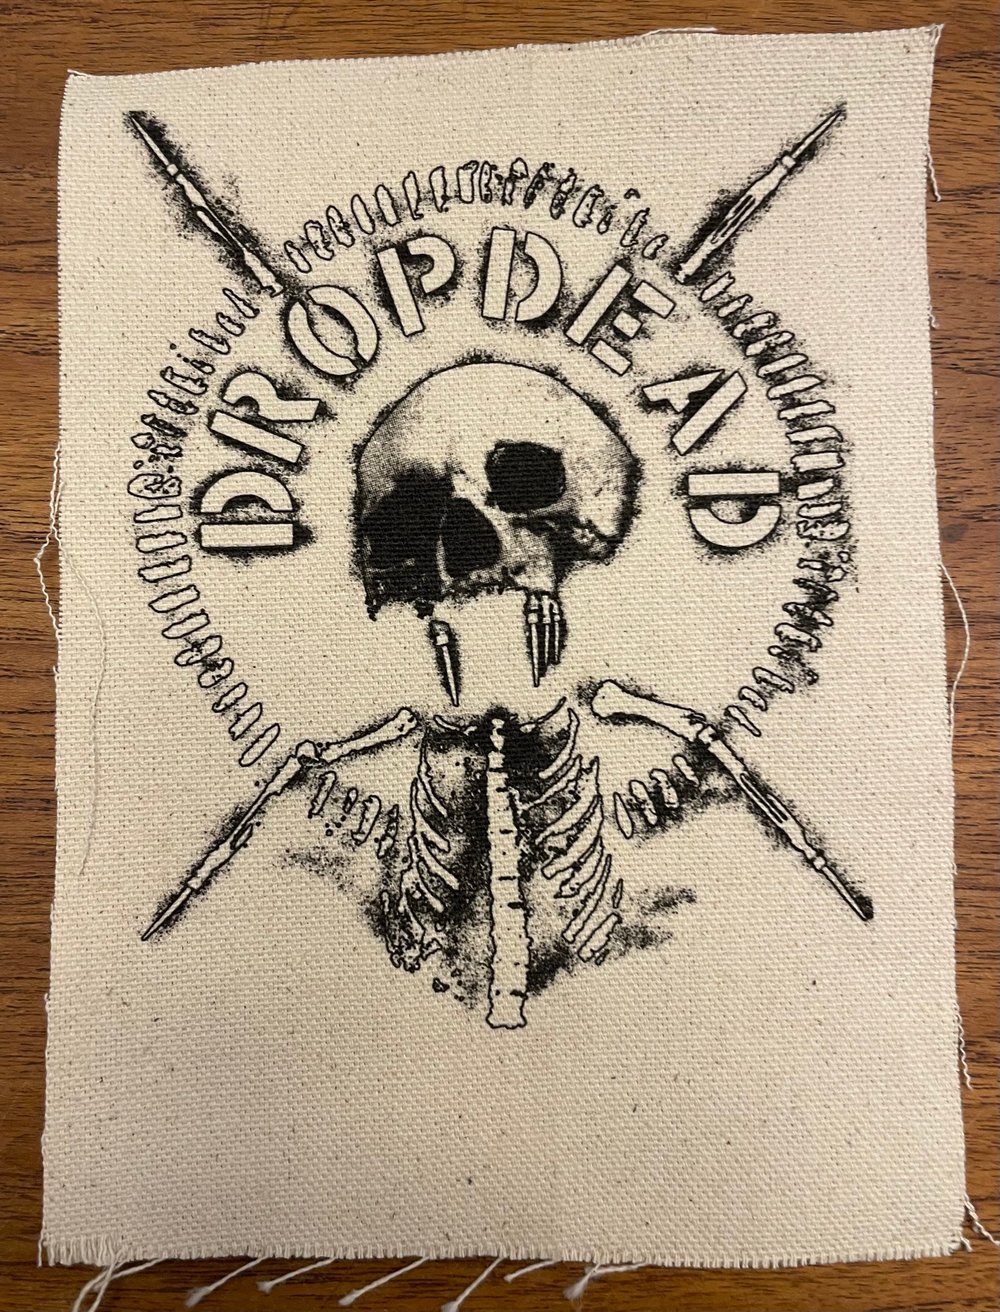 DROPDEAD Screenprinted Patch